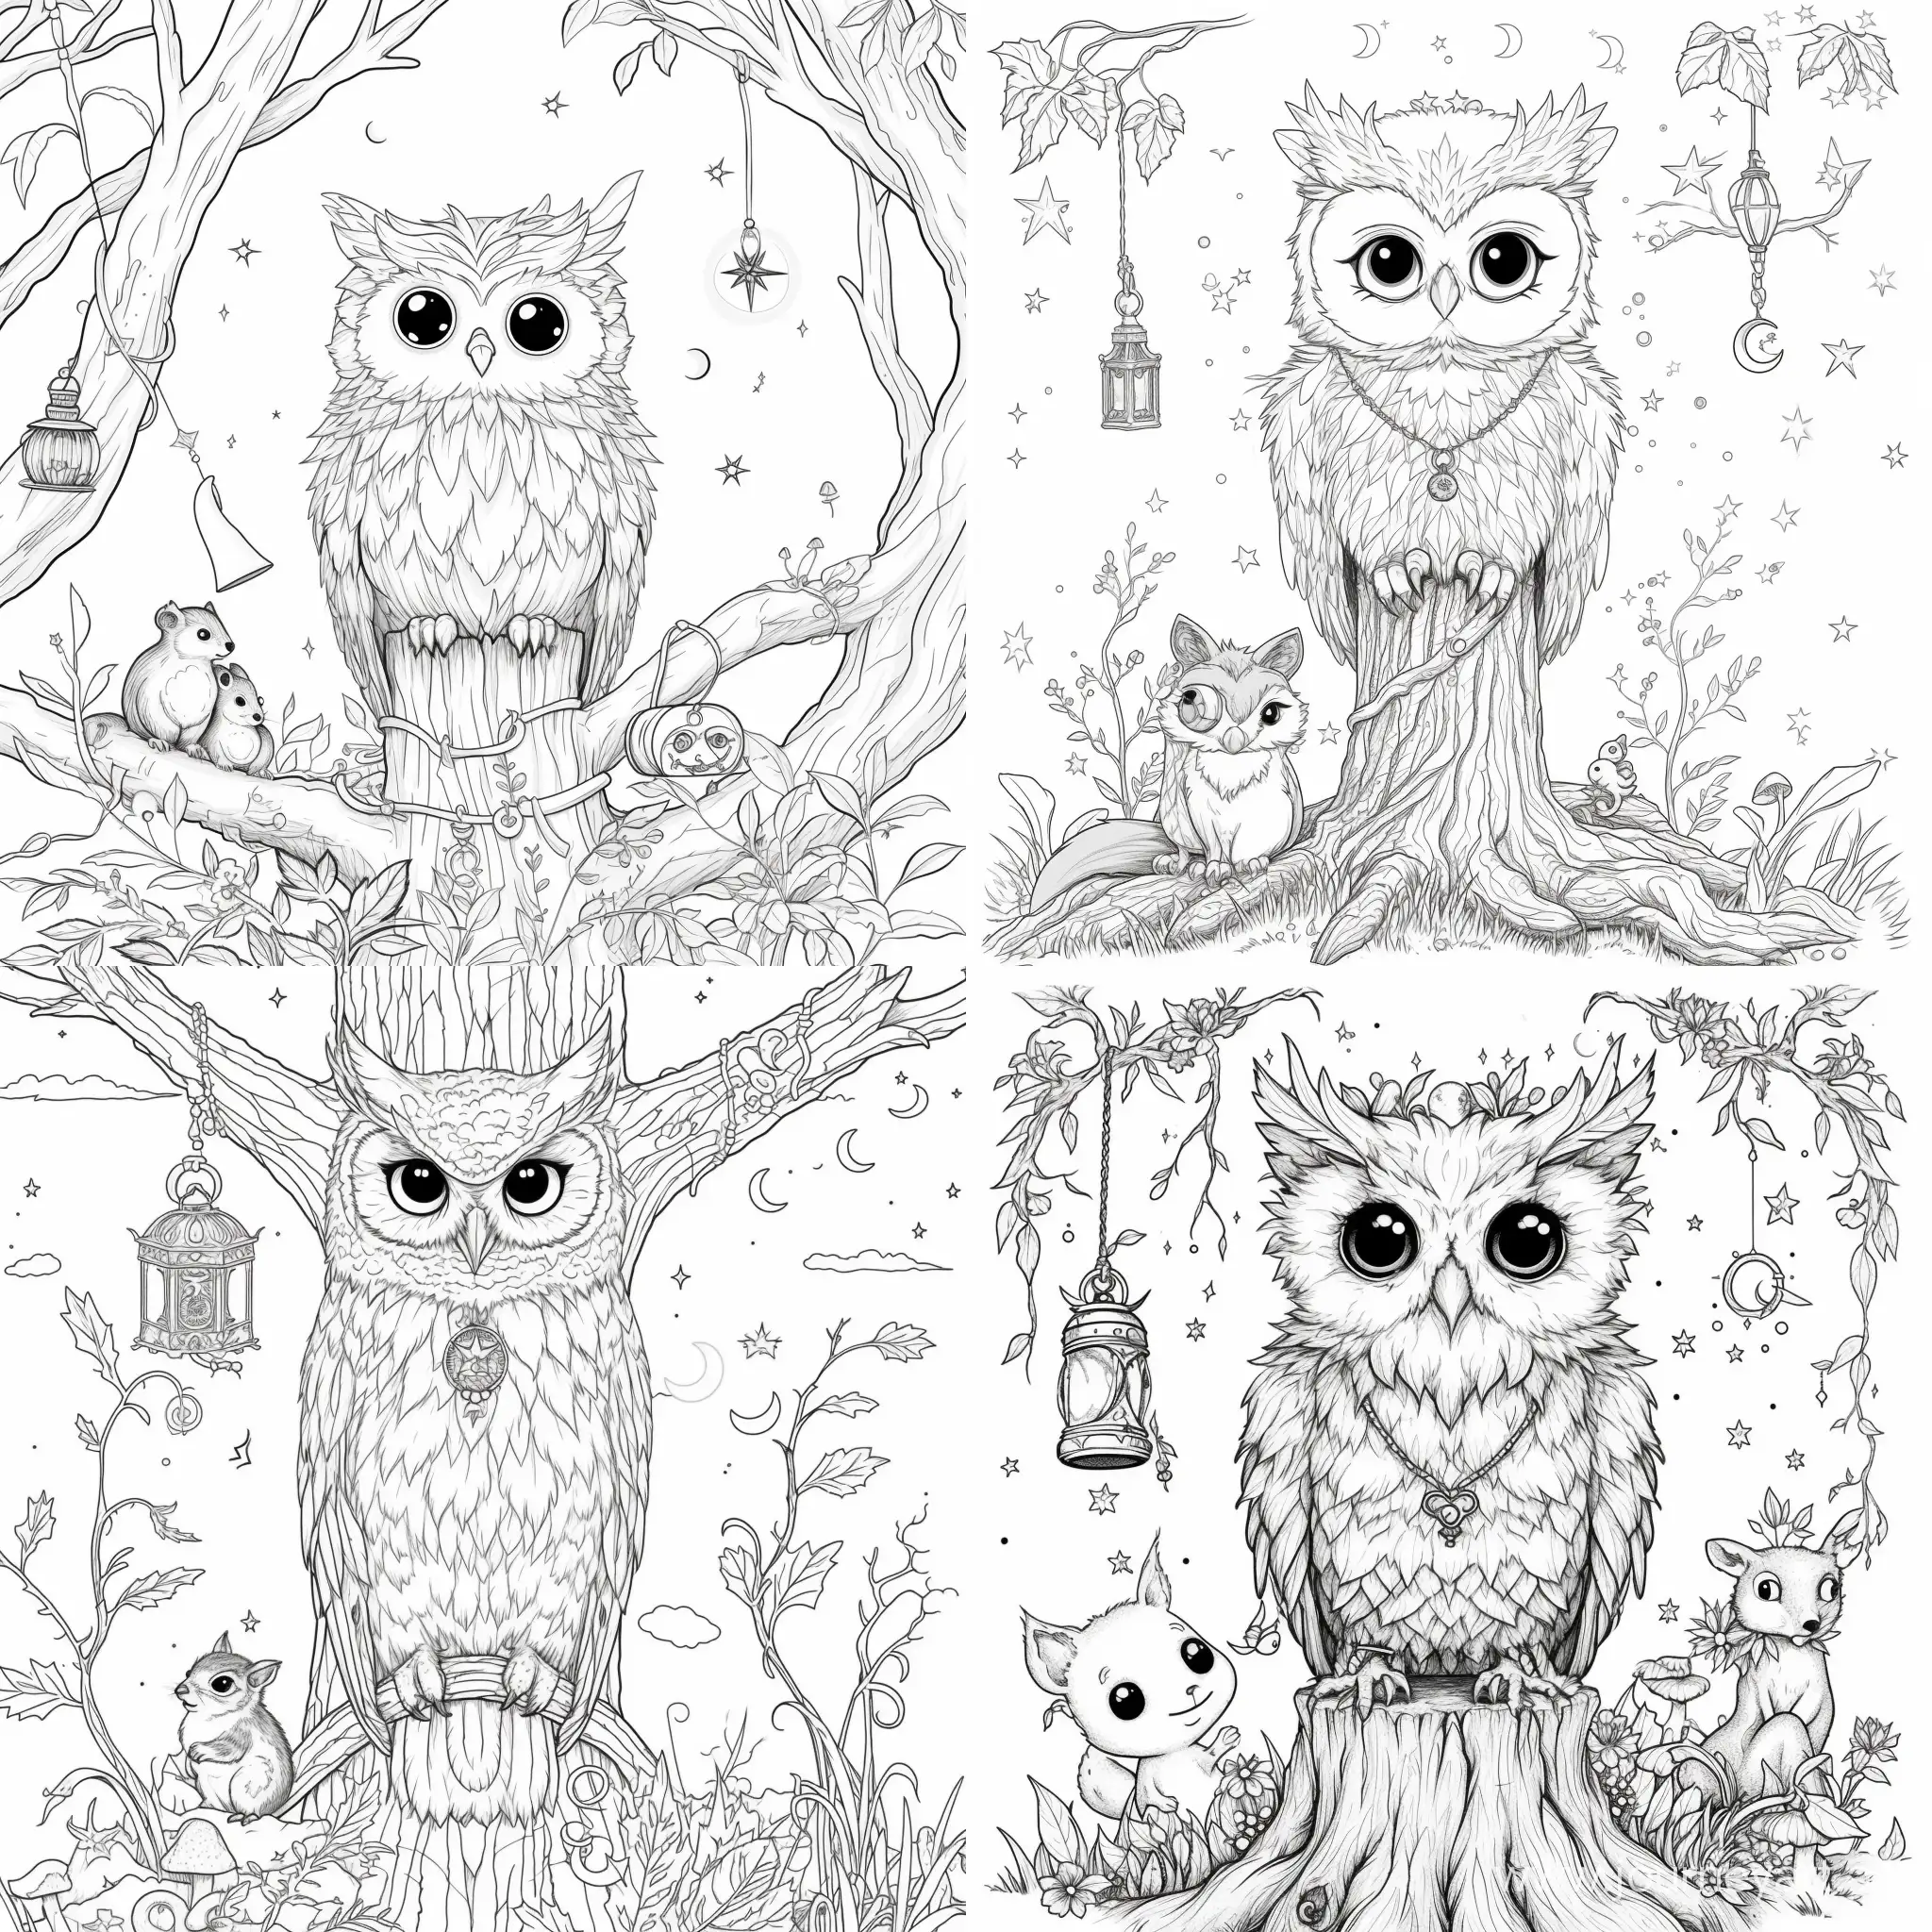 Mystical-Owl-on-Ancient-Tree-Coloring-Page-Enchanting-Black-and-White-Outline-Art